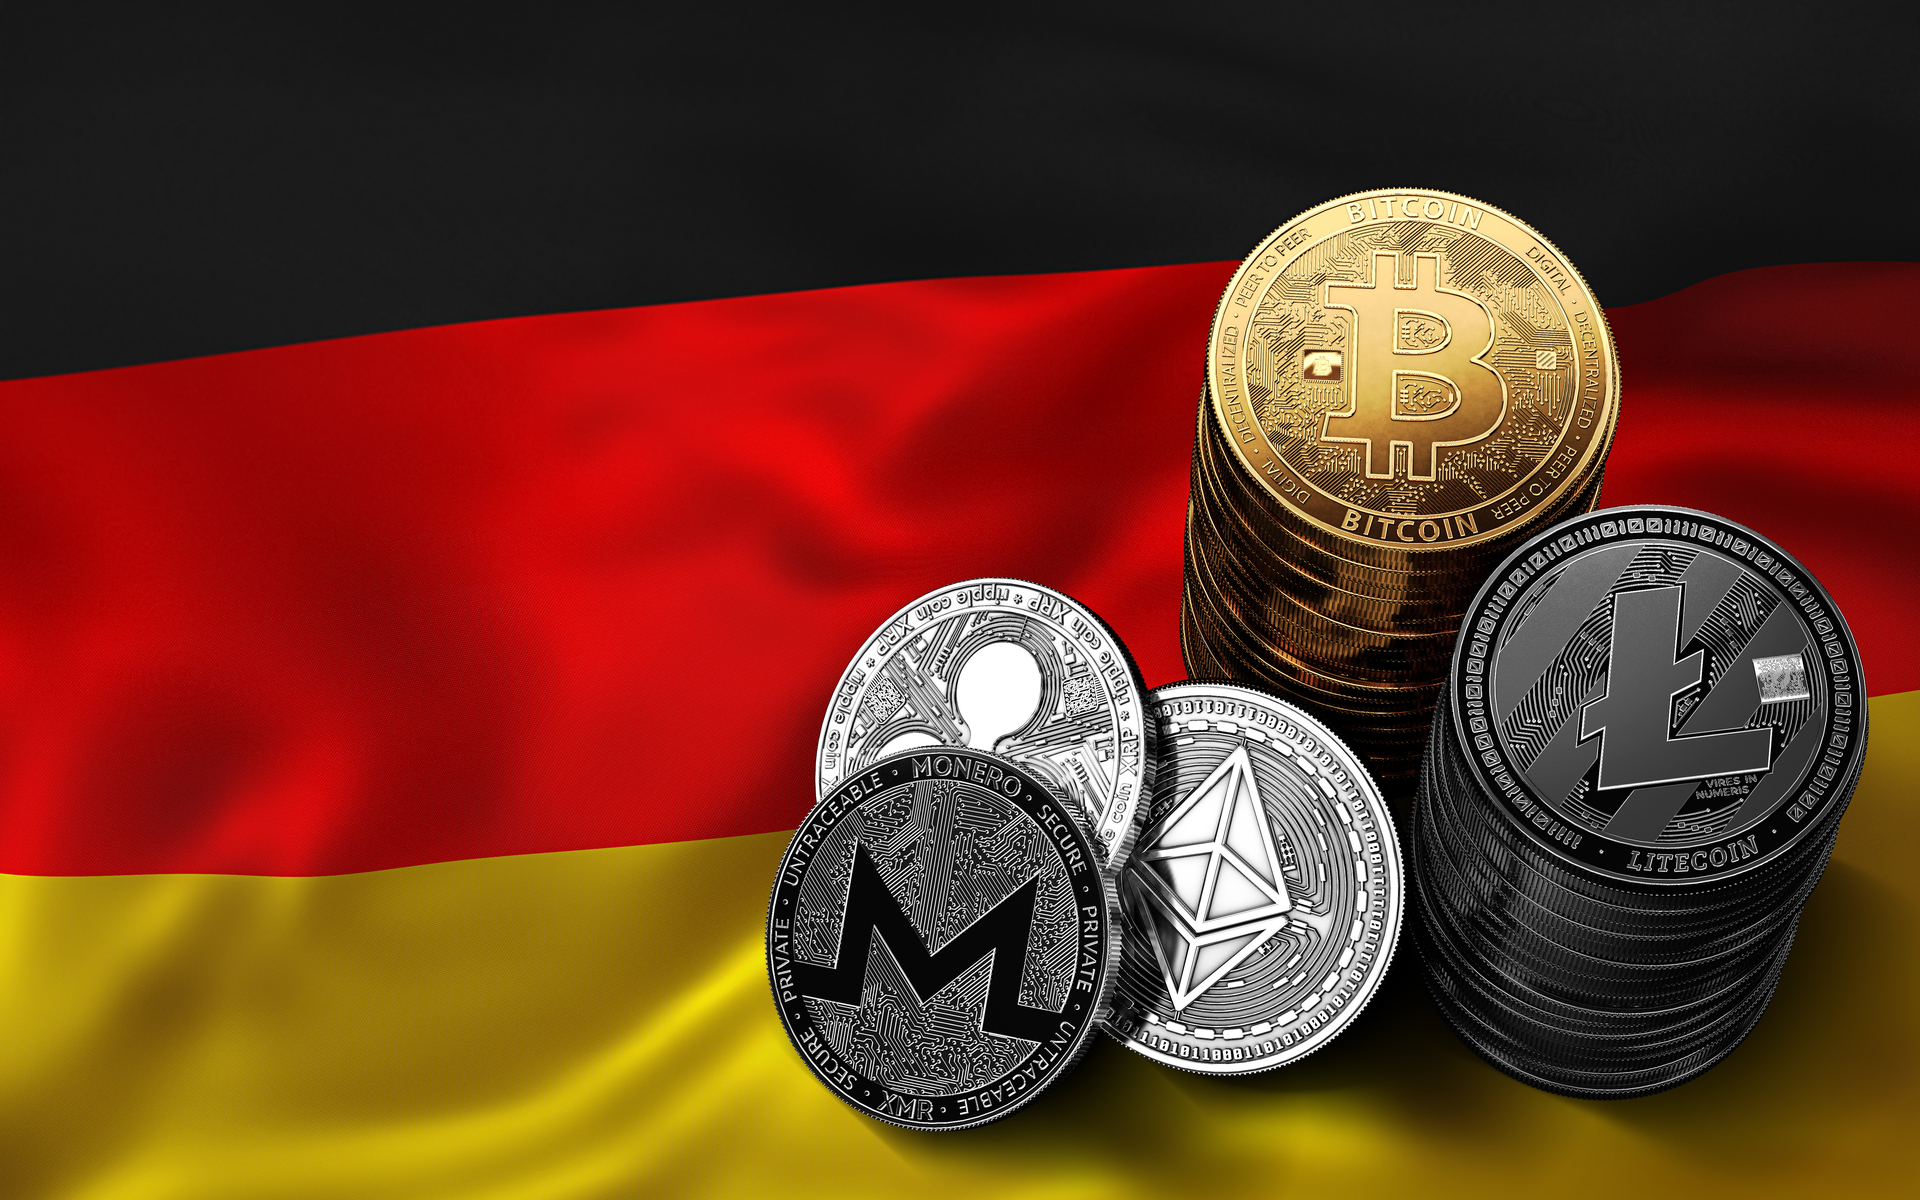 Germany issue new crypto regulations